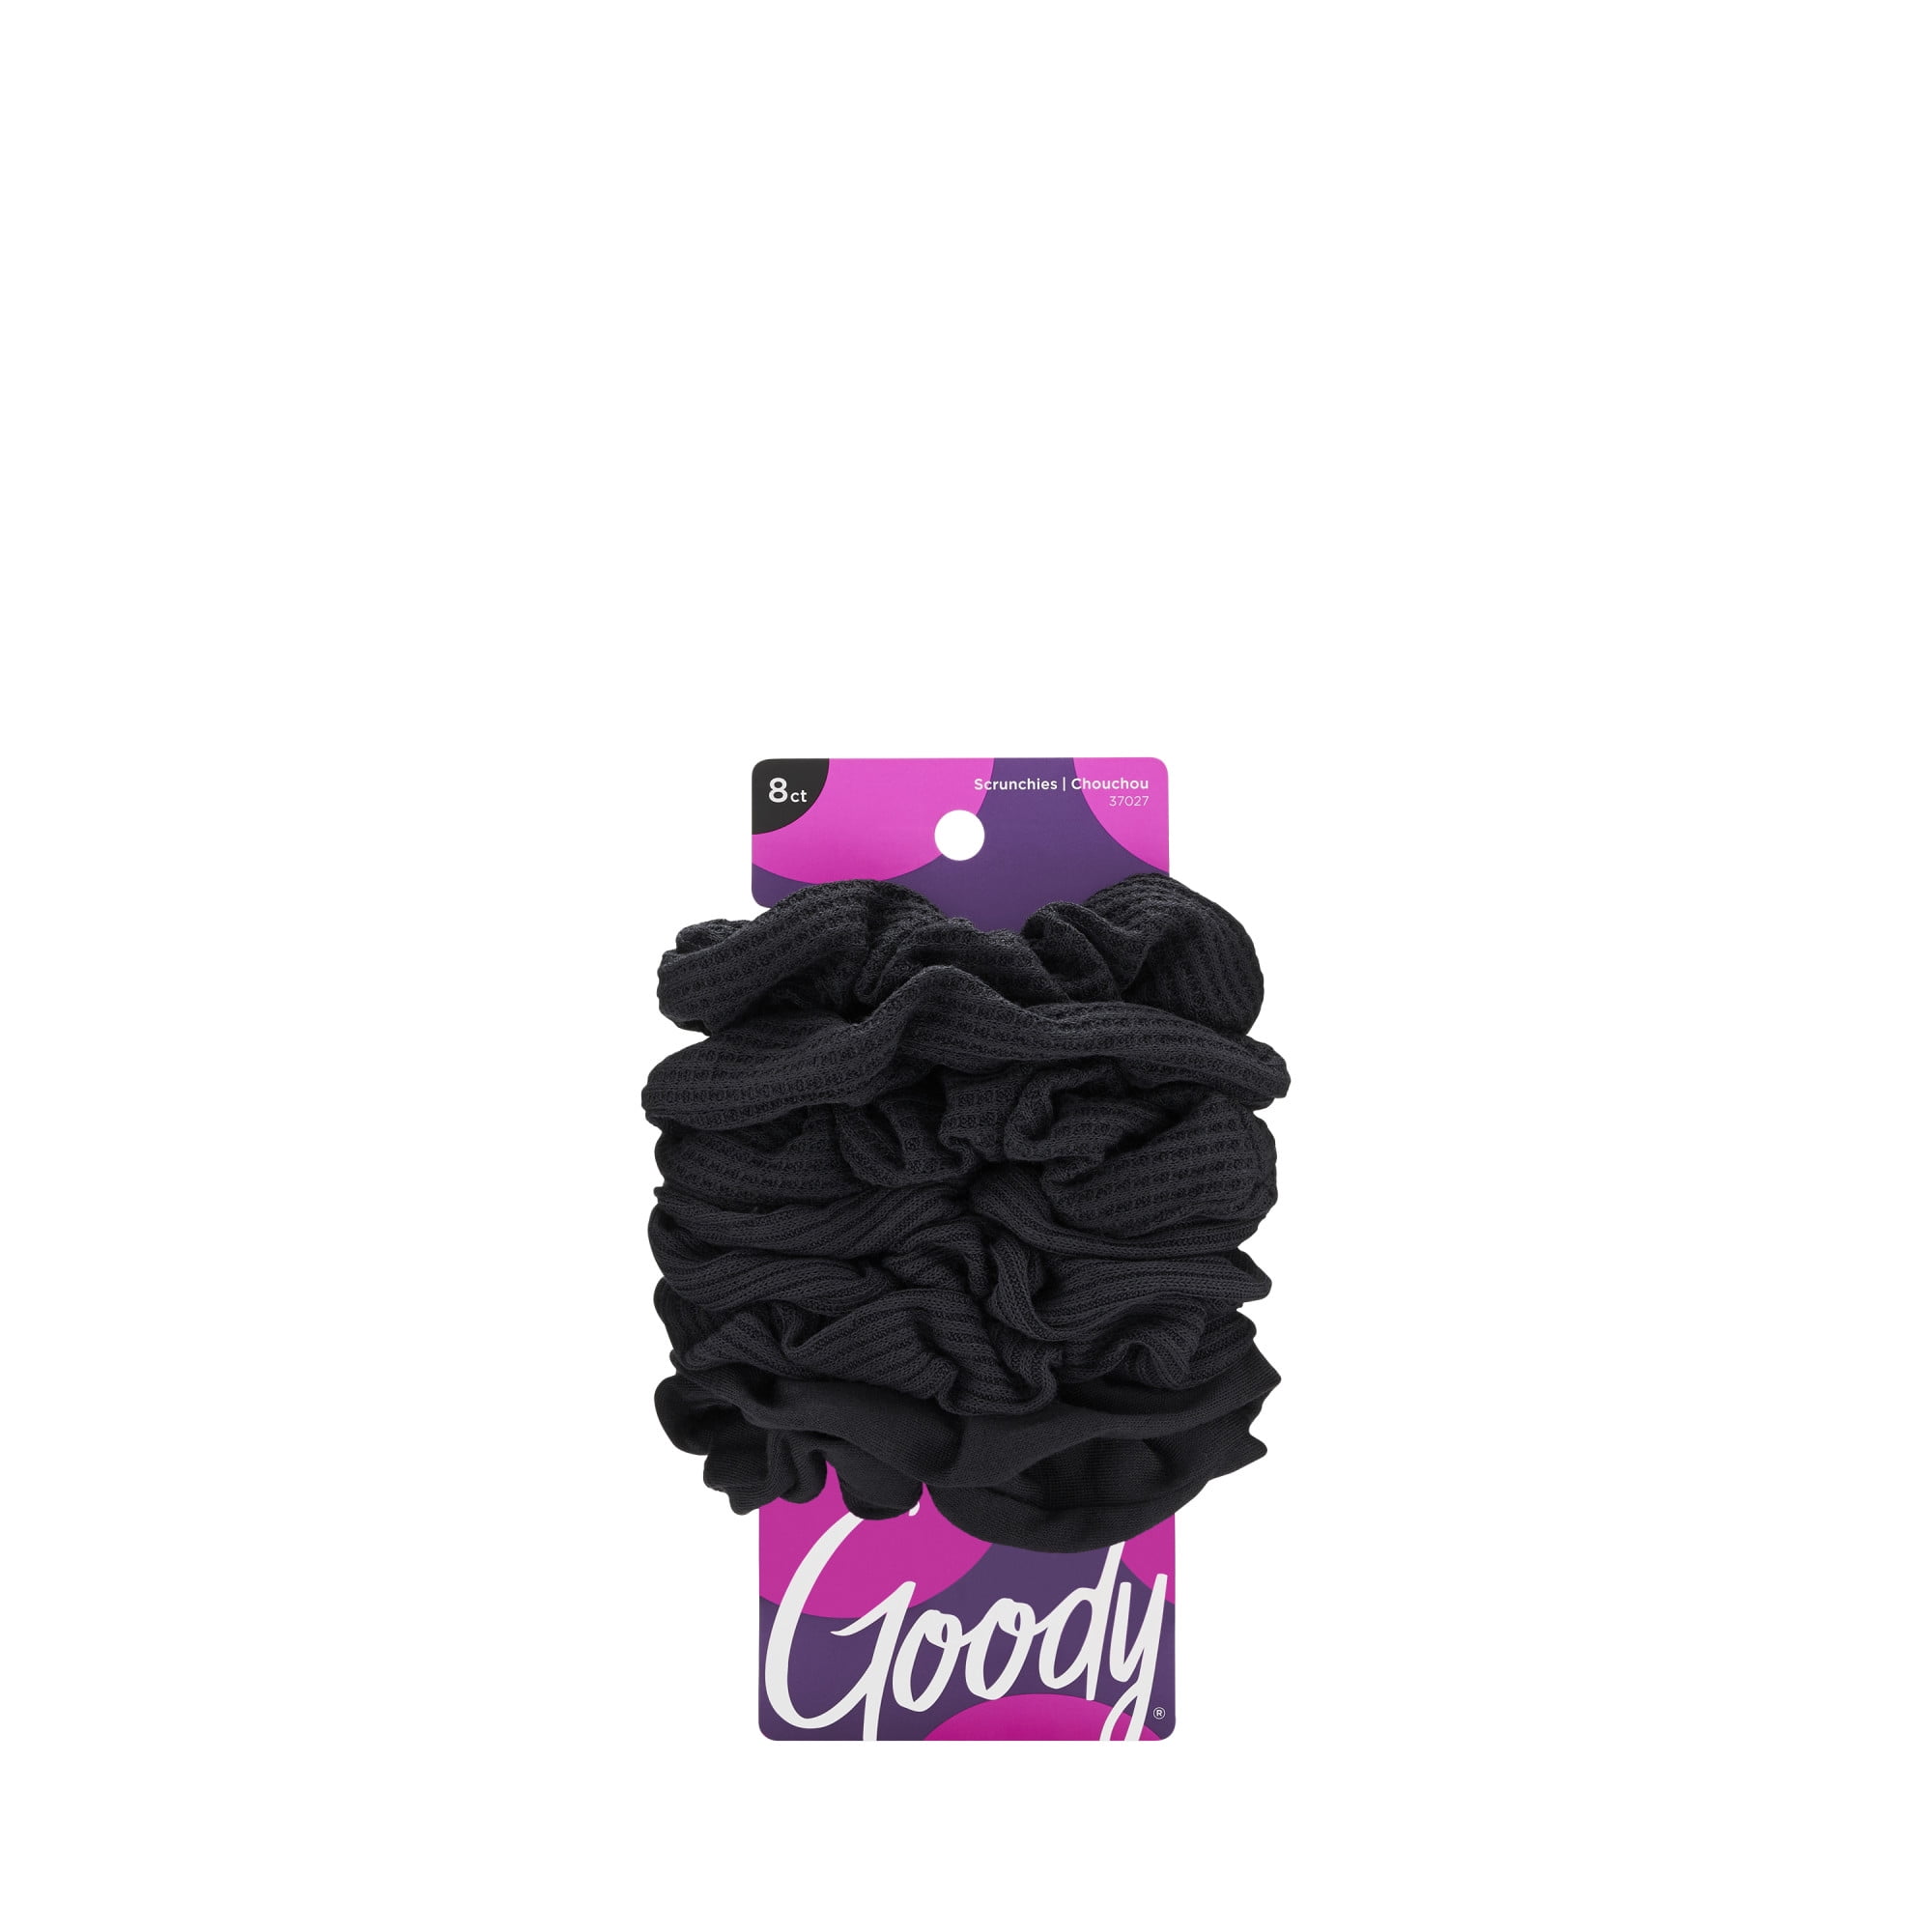 Goody Ouchless Scrunchies, Gentle Hair Scrunchies, Black, 8 Ct